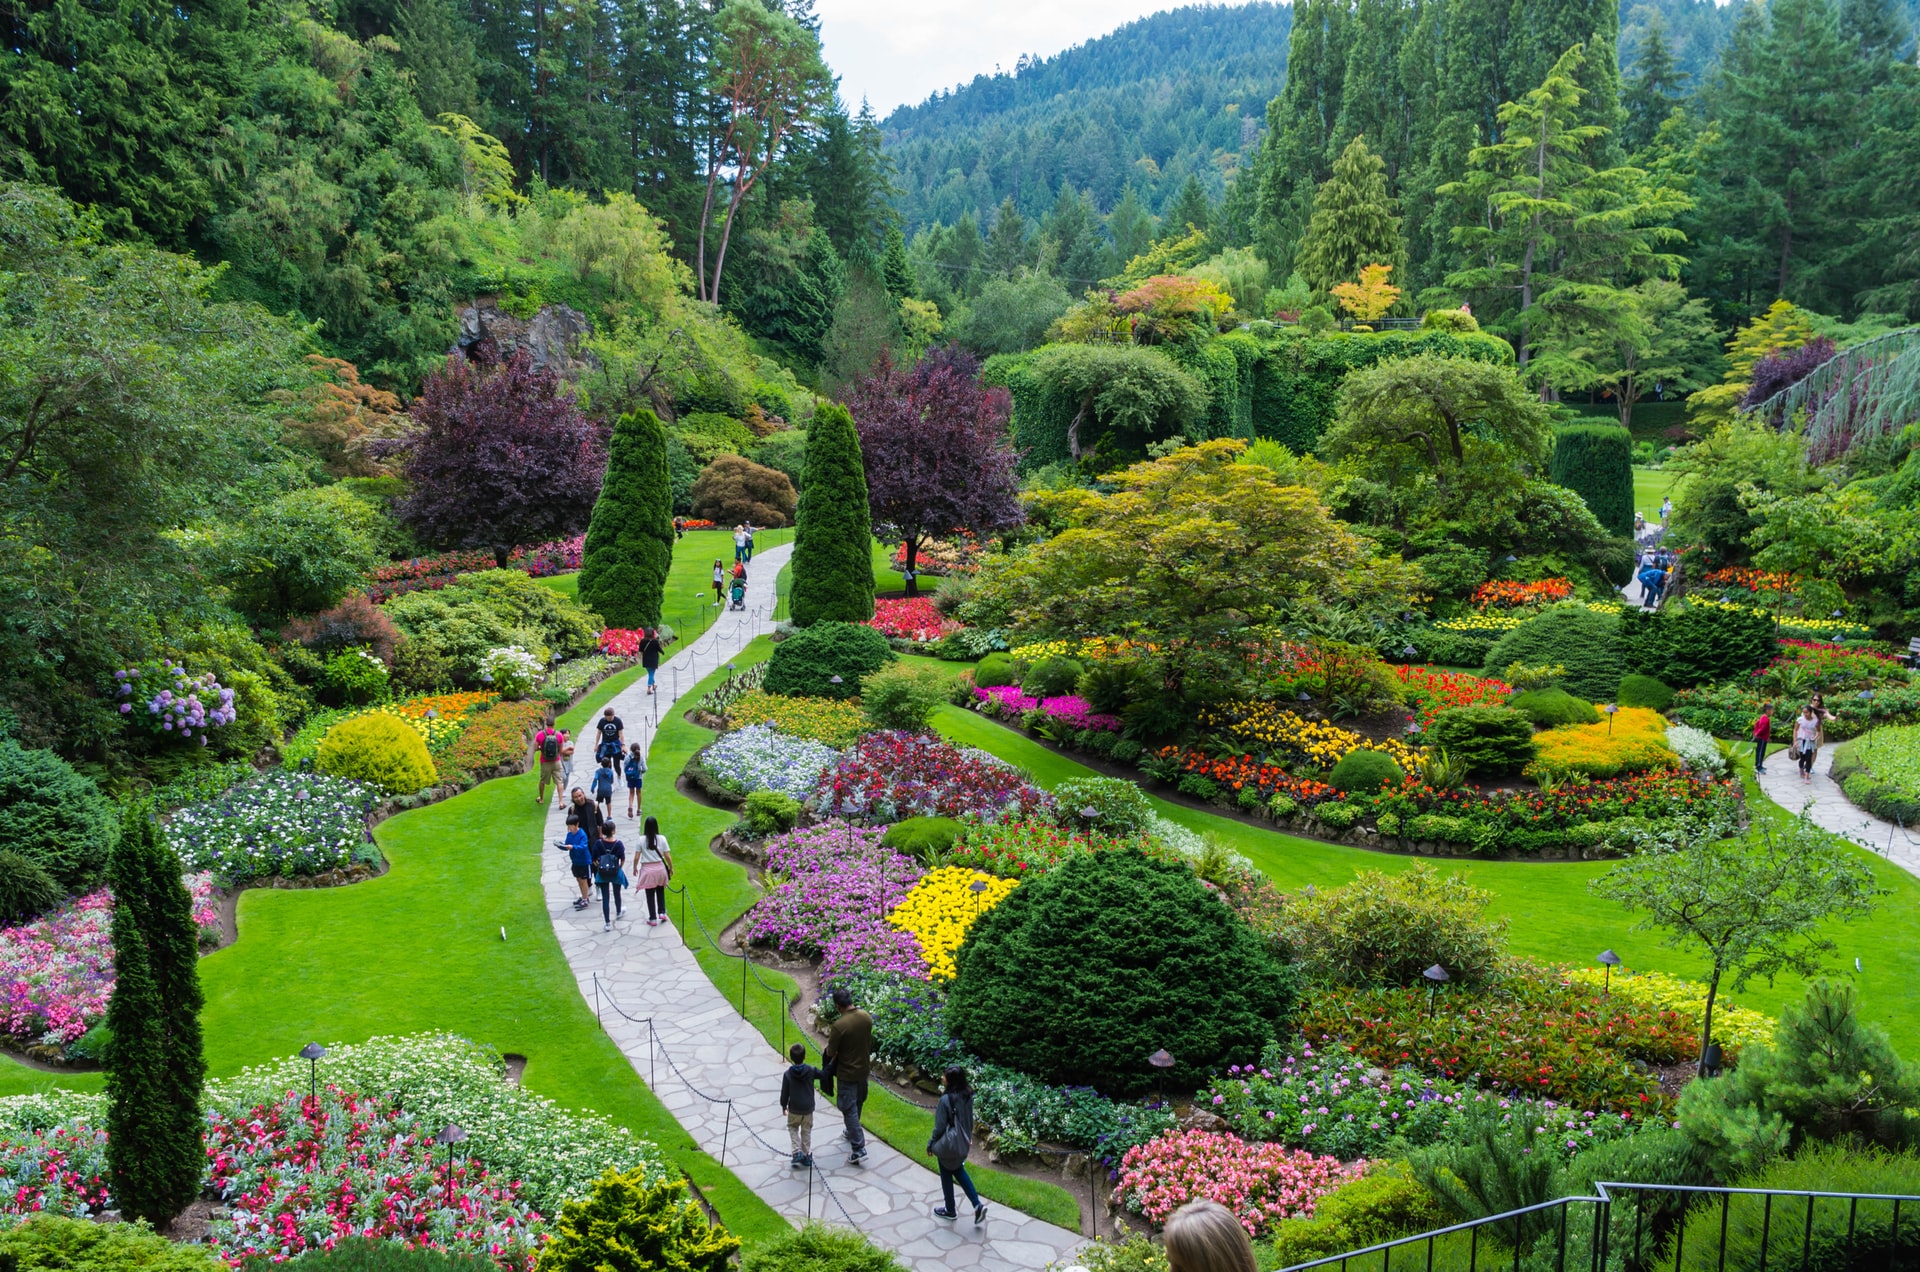 Vancouver Island tourist attractions - Butchart Gardens 